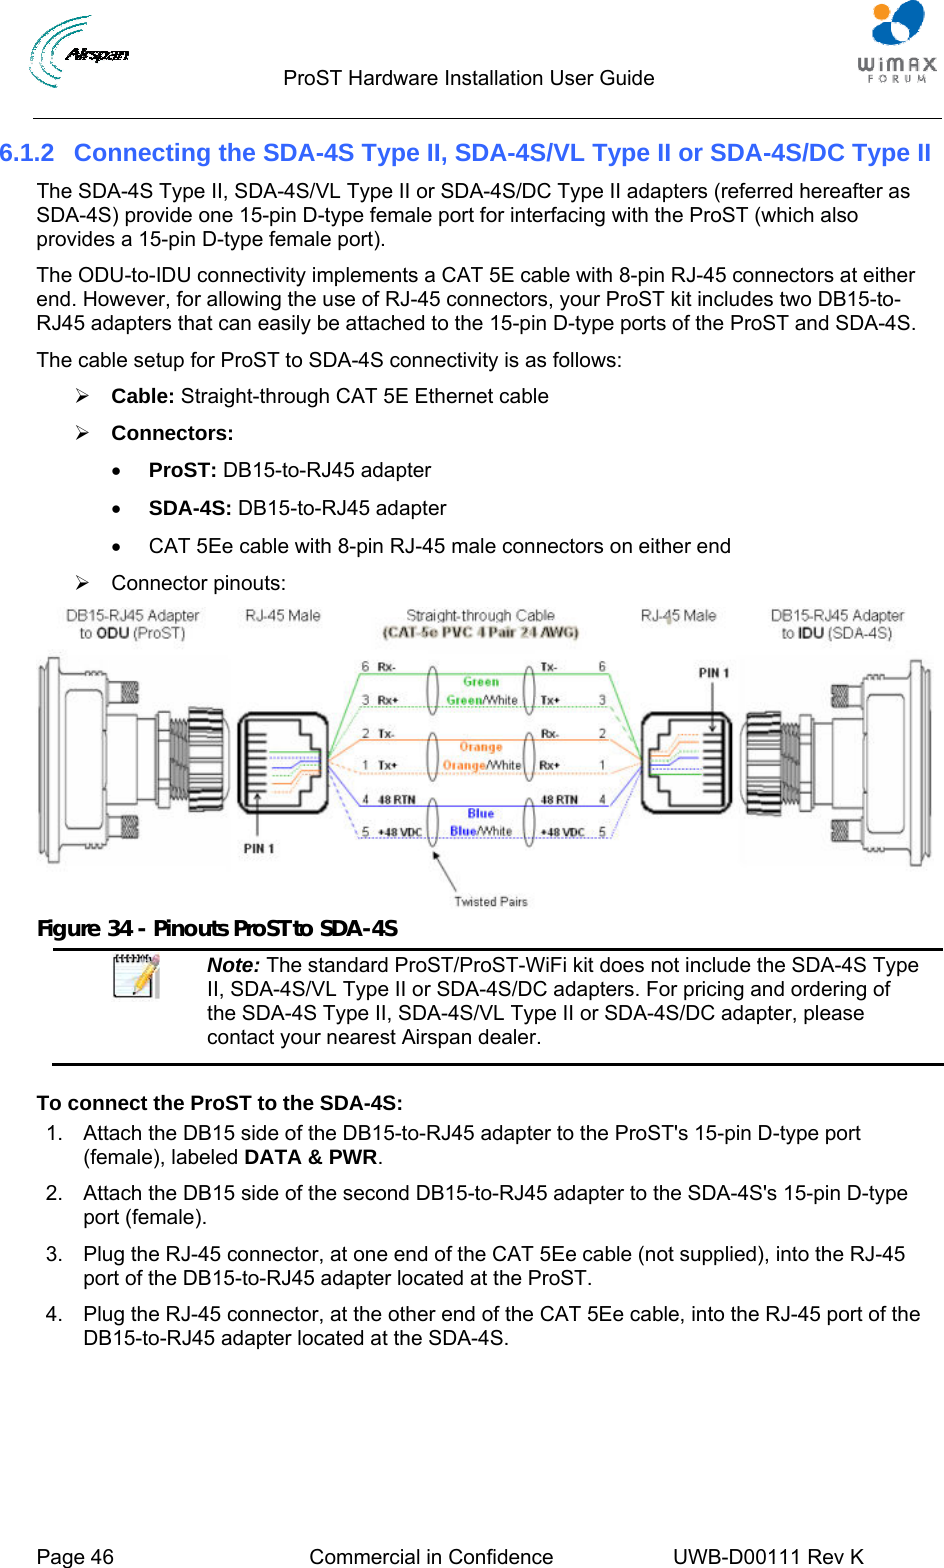                                  ProST Hardware Installation User Guide     Page 46  Commercial in Confidence  UWB-D00111 Rev K   6.1.2  Connecting the SDA-4S Type II, SDA-4S/VL Type II or SDA-4S/DC Type II The SDA-4S Type II, SDA-4S/VL Type II or SDA-4S/DC Type II adapters (referred hereafter as SDA-4S) provide one 15-pin D-type female port for interfacing with the ProST (which also provides a 15-pin D-type female port).  The ODU-to-IDU connectivity implements a CAT 5E cable with 8-pin RJ-45 connectors at either end. However, for allowing the use of RJ-45 connectors, your ProST kit includes two DB15-to-RJ45 adapters that can easily be attached to the 15-pin D-type ports of the ProST and SDA-4S. The cable setup for ProST to SDA-4S connectivity is as follows: ¾ Cable: Straight-through CAT 5E Ethernet cable ¾ Connectors:  • ProST: DB15-to-RJ45 adapter • SDA-4S: DB15-to-RJ45 adapter •  CAT 5Ee cable with 8-pin RJ-45 male connectors on either end ¾ Connector pinouts:  Figure 34 - Pinouts ProST to SDA-4S  Note: The standard ProST/ProST-WiFi kit does not include the SDA-4S Type II, SDA-4S/VL Type II or SDA-4S/DC adapters. For pricing and ordering of the SDA-4S Type II, SDA-4S/VL Type II or SDA-4S/DC adapter, please contact your nearest Airspan dealer.  To connect the ProST to the SDA-4S: 1.  Attach the DB15 side of the DB15-to-RJ45 adapter to the ProST&apos;s 15-pin D-type port (female), labeled DATA &amp; PWR. 2.  Attach the DB15 side of the second DB15-to-RJ45 adapter to the SDA-4S&apos;s 15-pin D-type port (female). 3.  Plug the RJ-45 connector, at one end of the CAT 5Ee cable (not supplied), into the RJ-45 port of the DB15-to-RJ45 adapter located at the ProST. 4.  Plug the RJ-45 connector, at the other end of the CAT 5Ee cable, into the RJ-45 port of the DB15-to-RJ45 adapter located at the SDA-4S. 